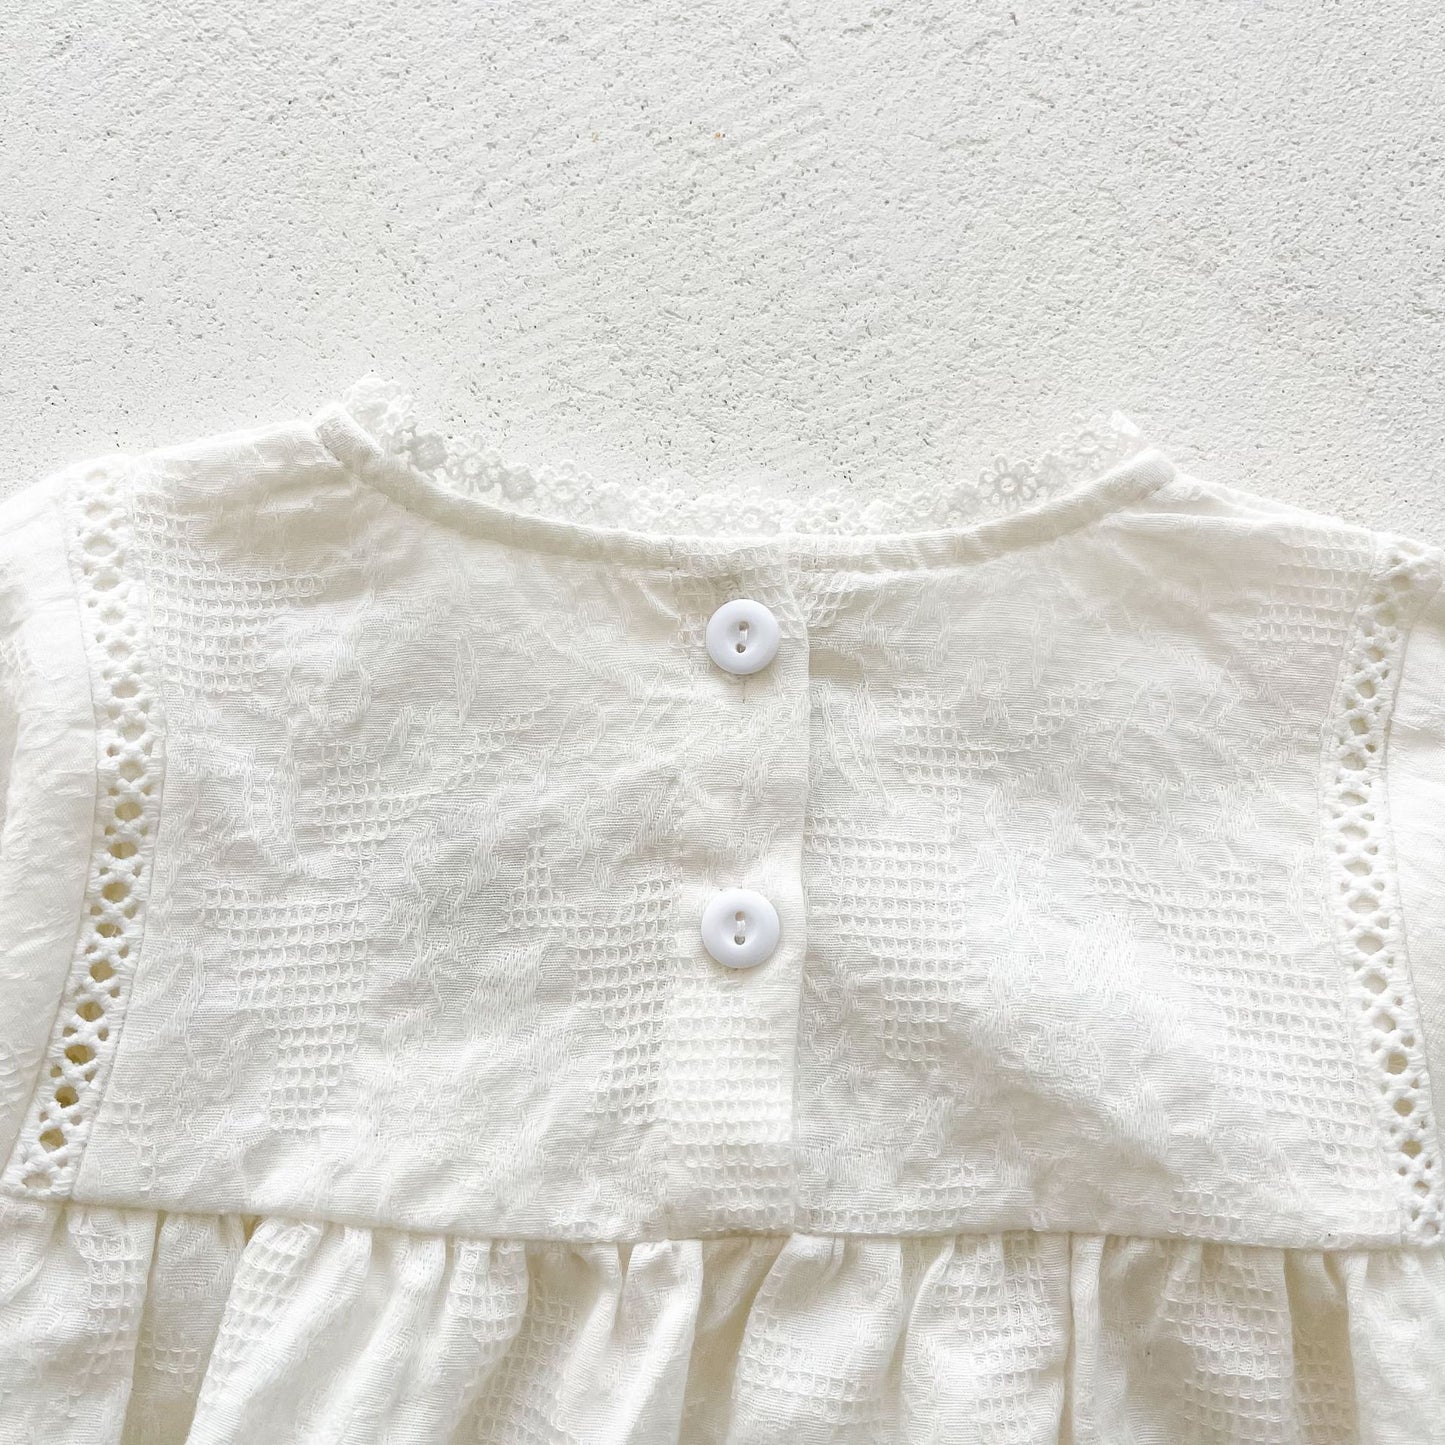 Baby Girl Embroidery Round Collar Long Sleeve Onesies